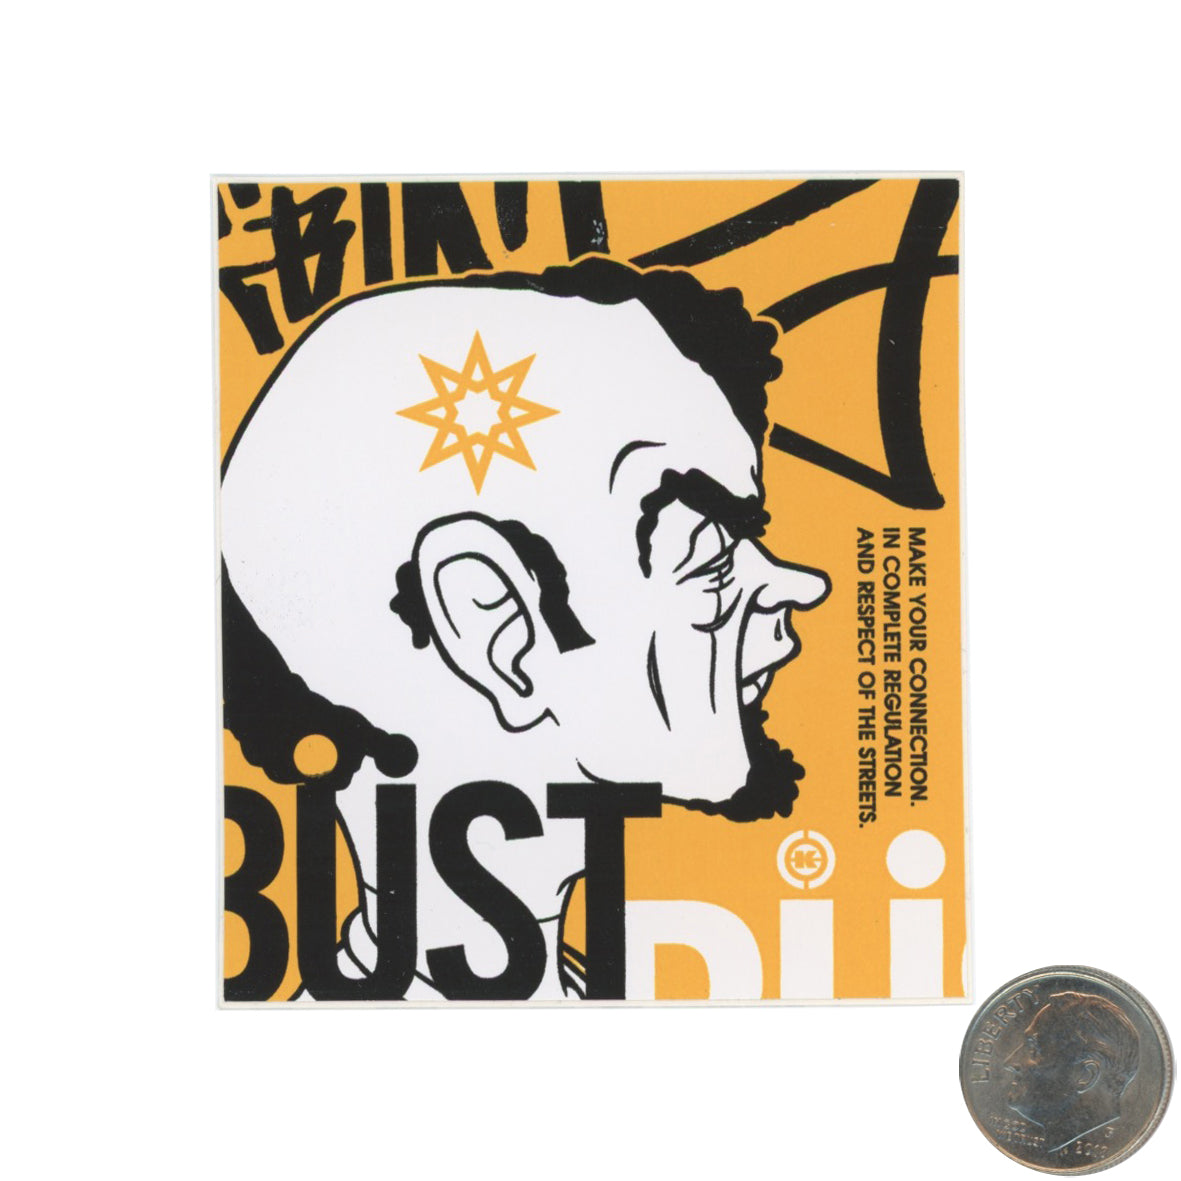 Dave Kinsey BUST Black Yellow Sticker with dime